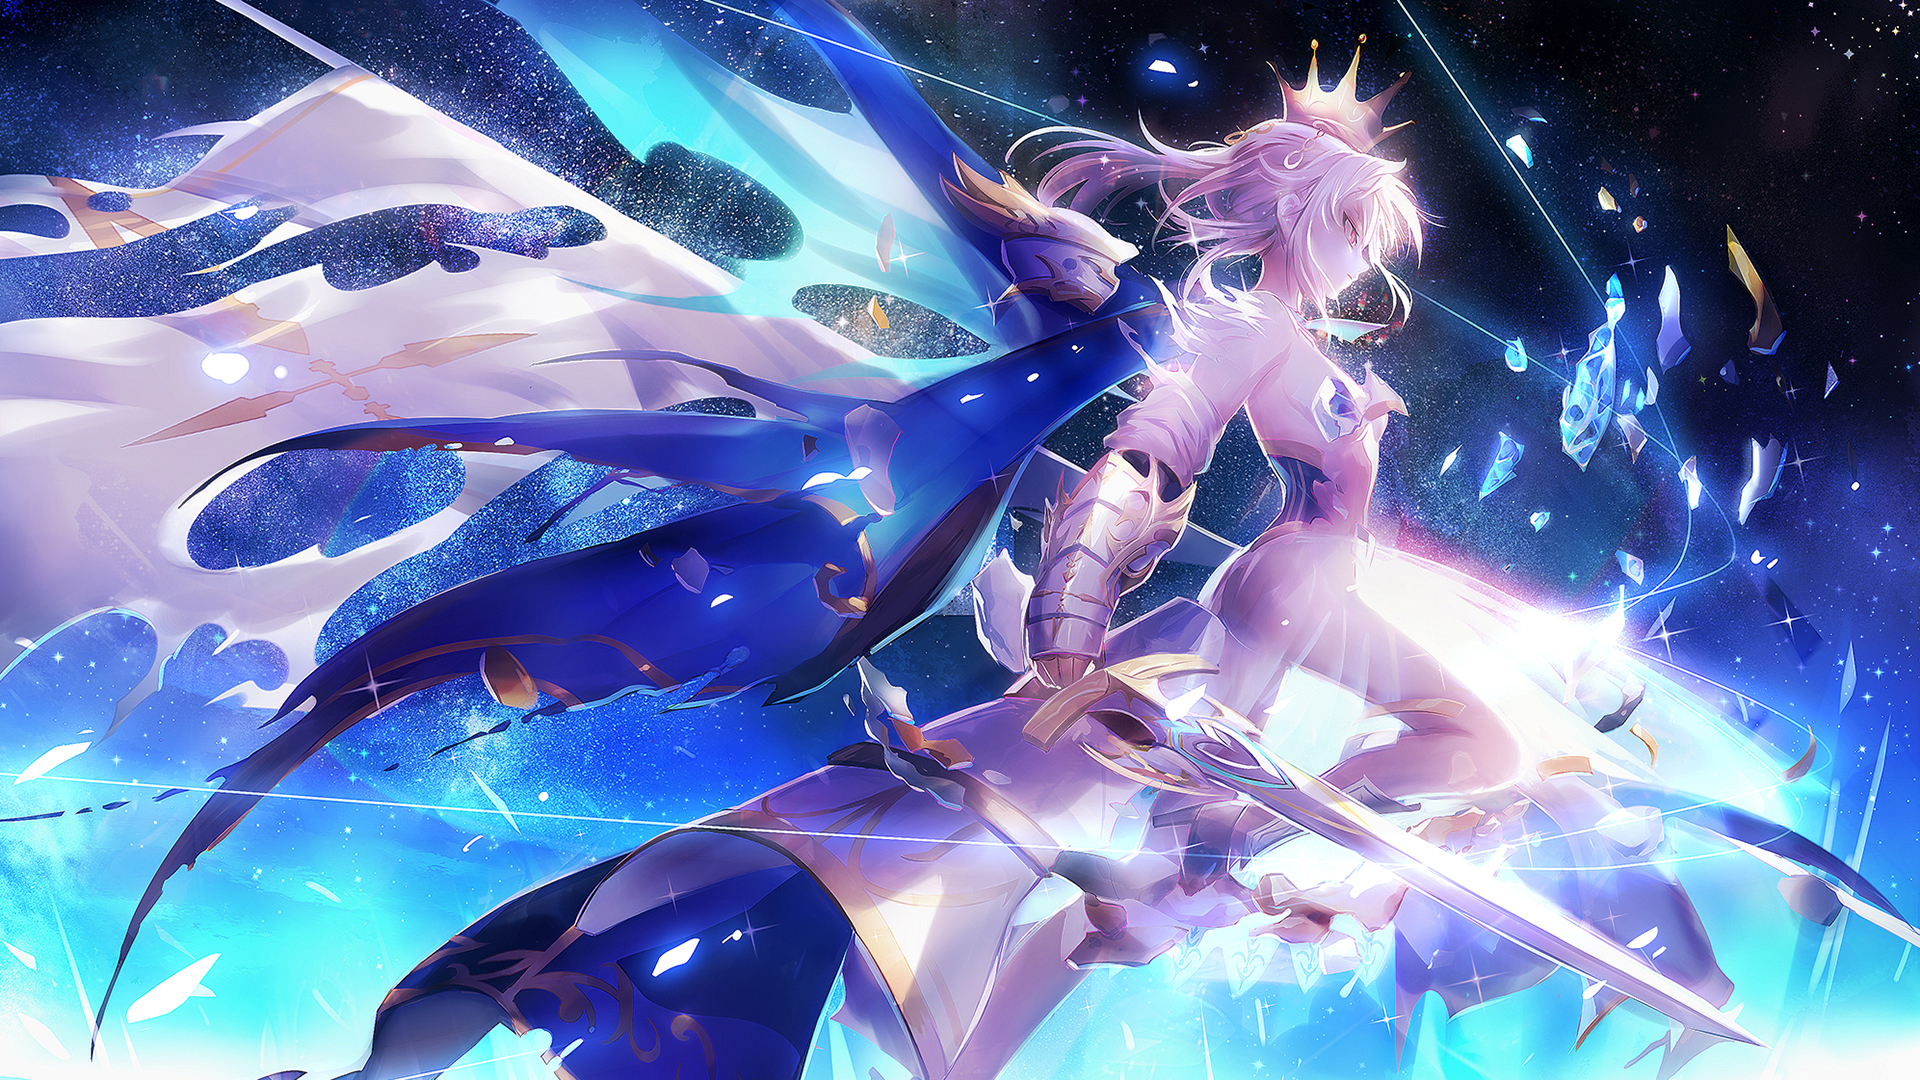 1300+ Saber (Fate Series) HD Wallpapers and Backgrounds